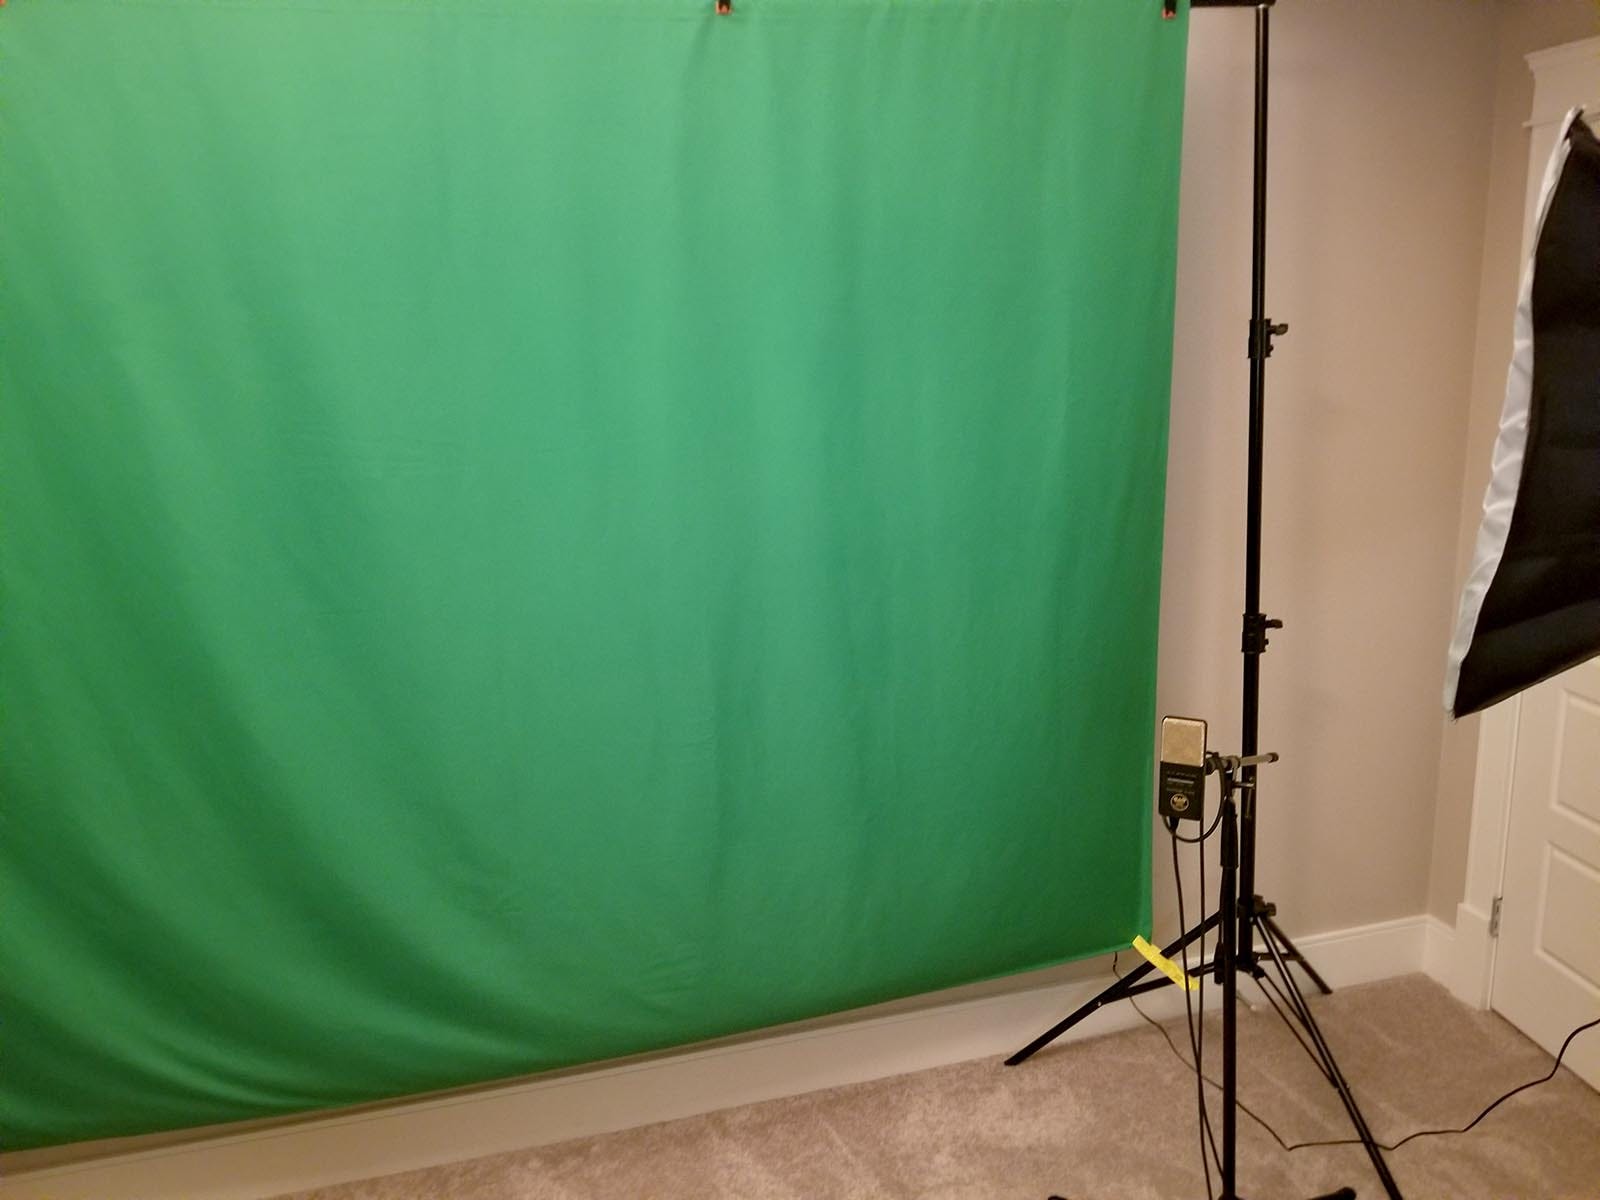 How to build a green screen studio - 5 things you need